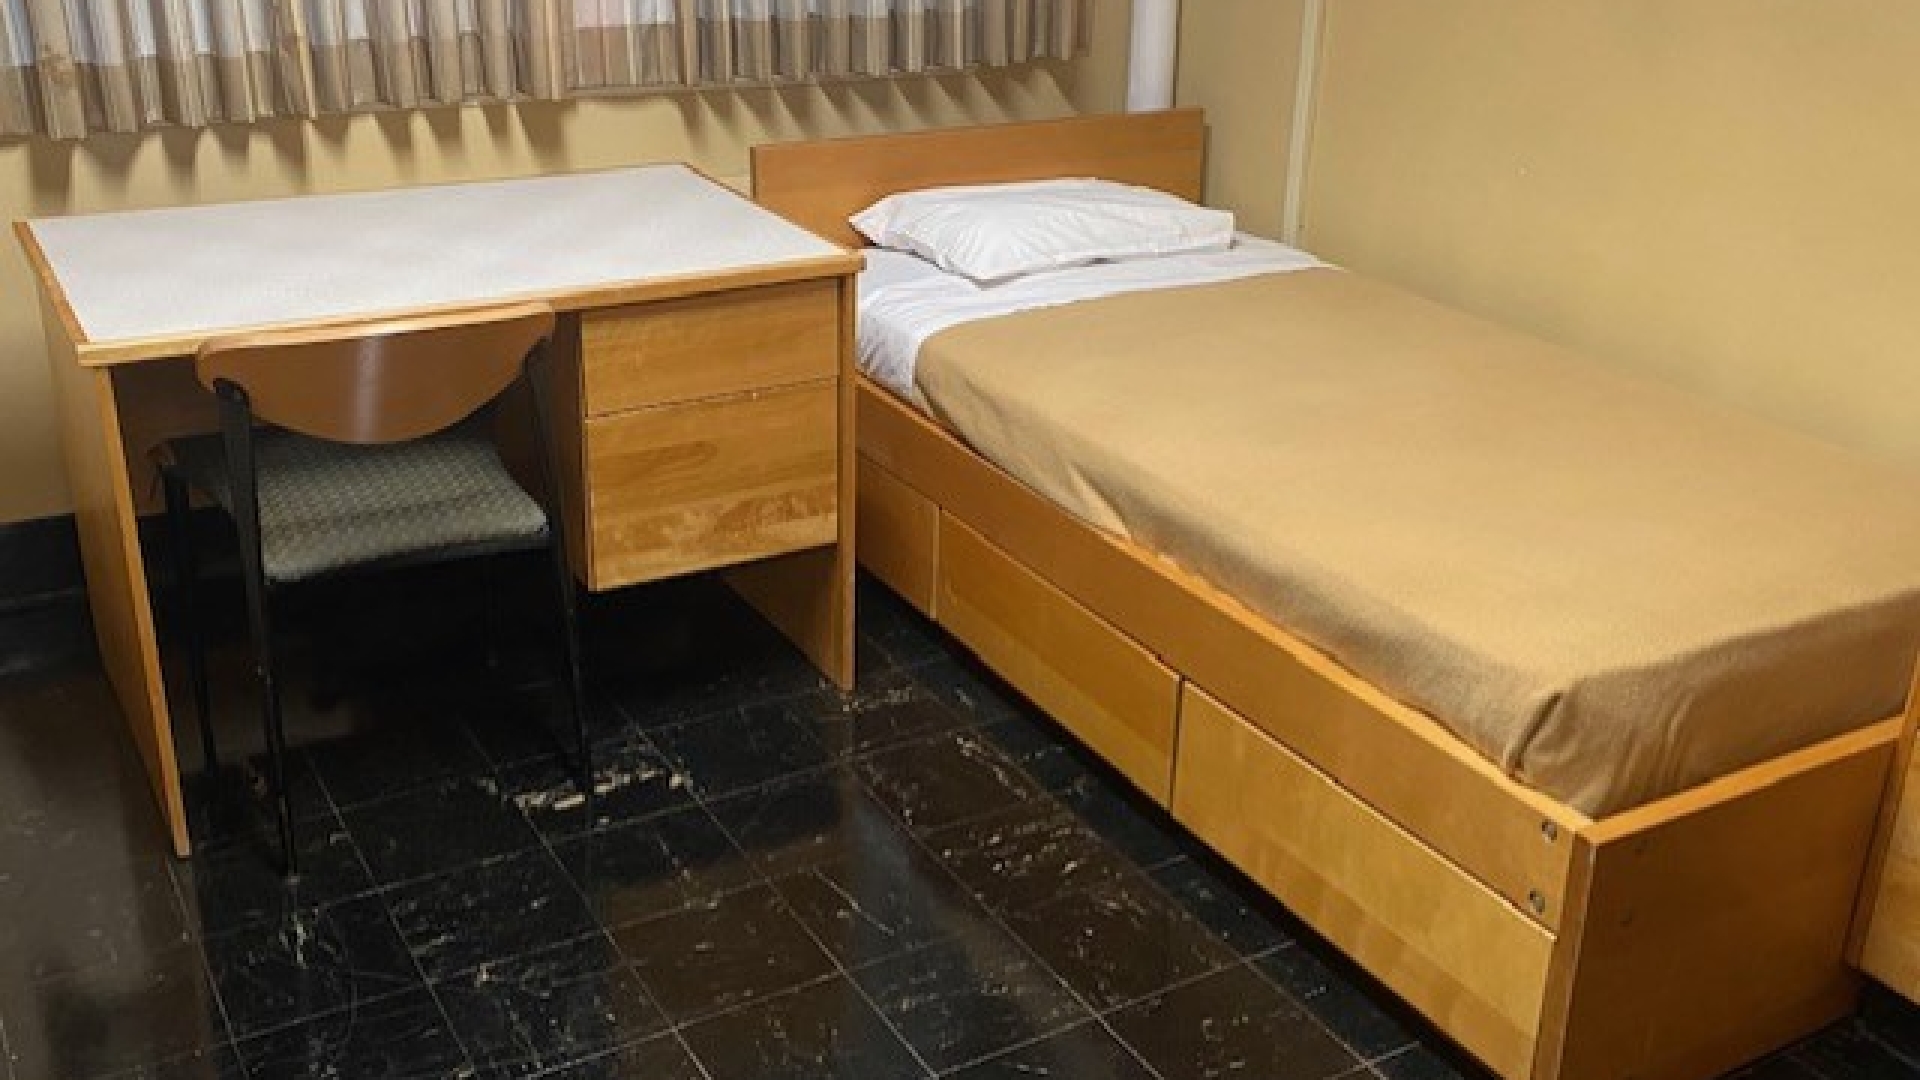 A Bed and Desk in Cameron Hall